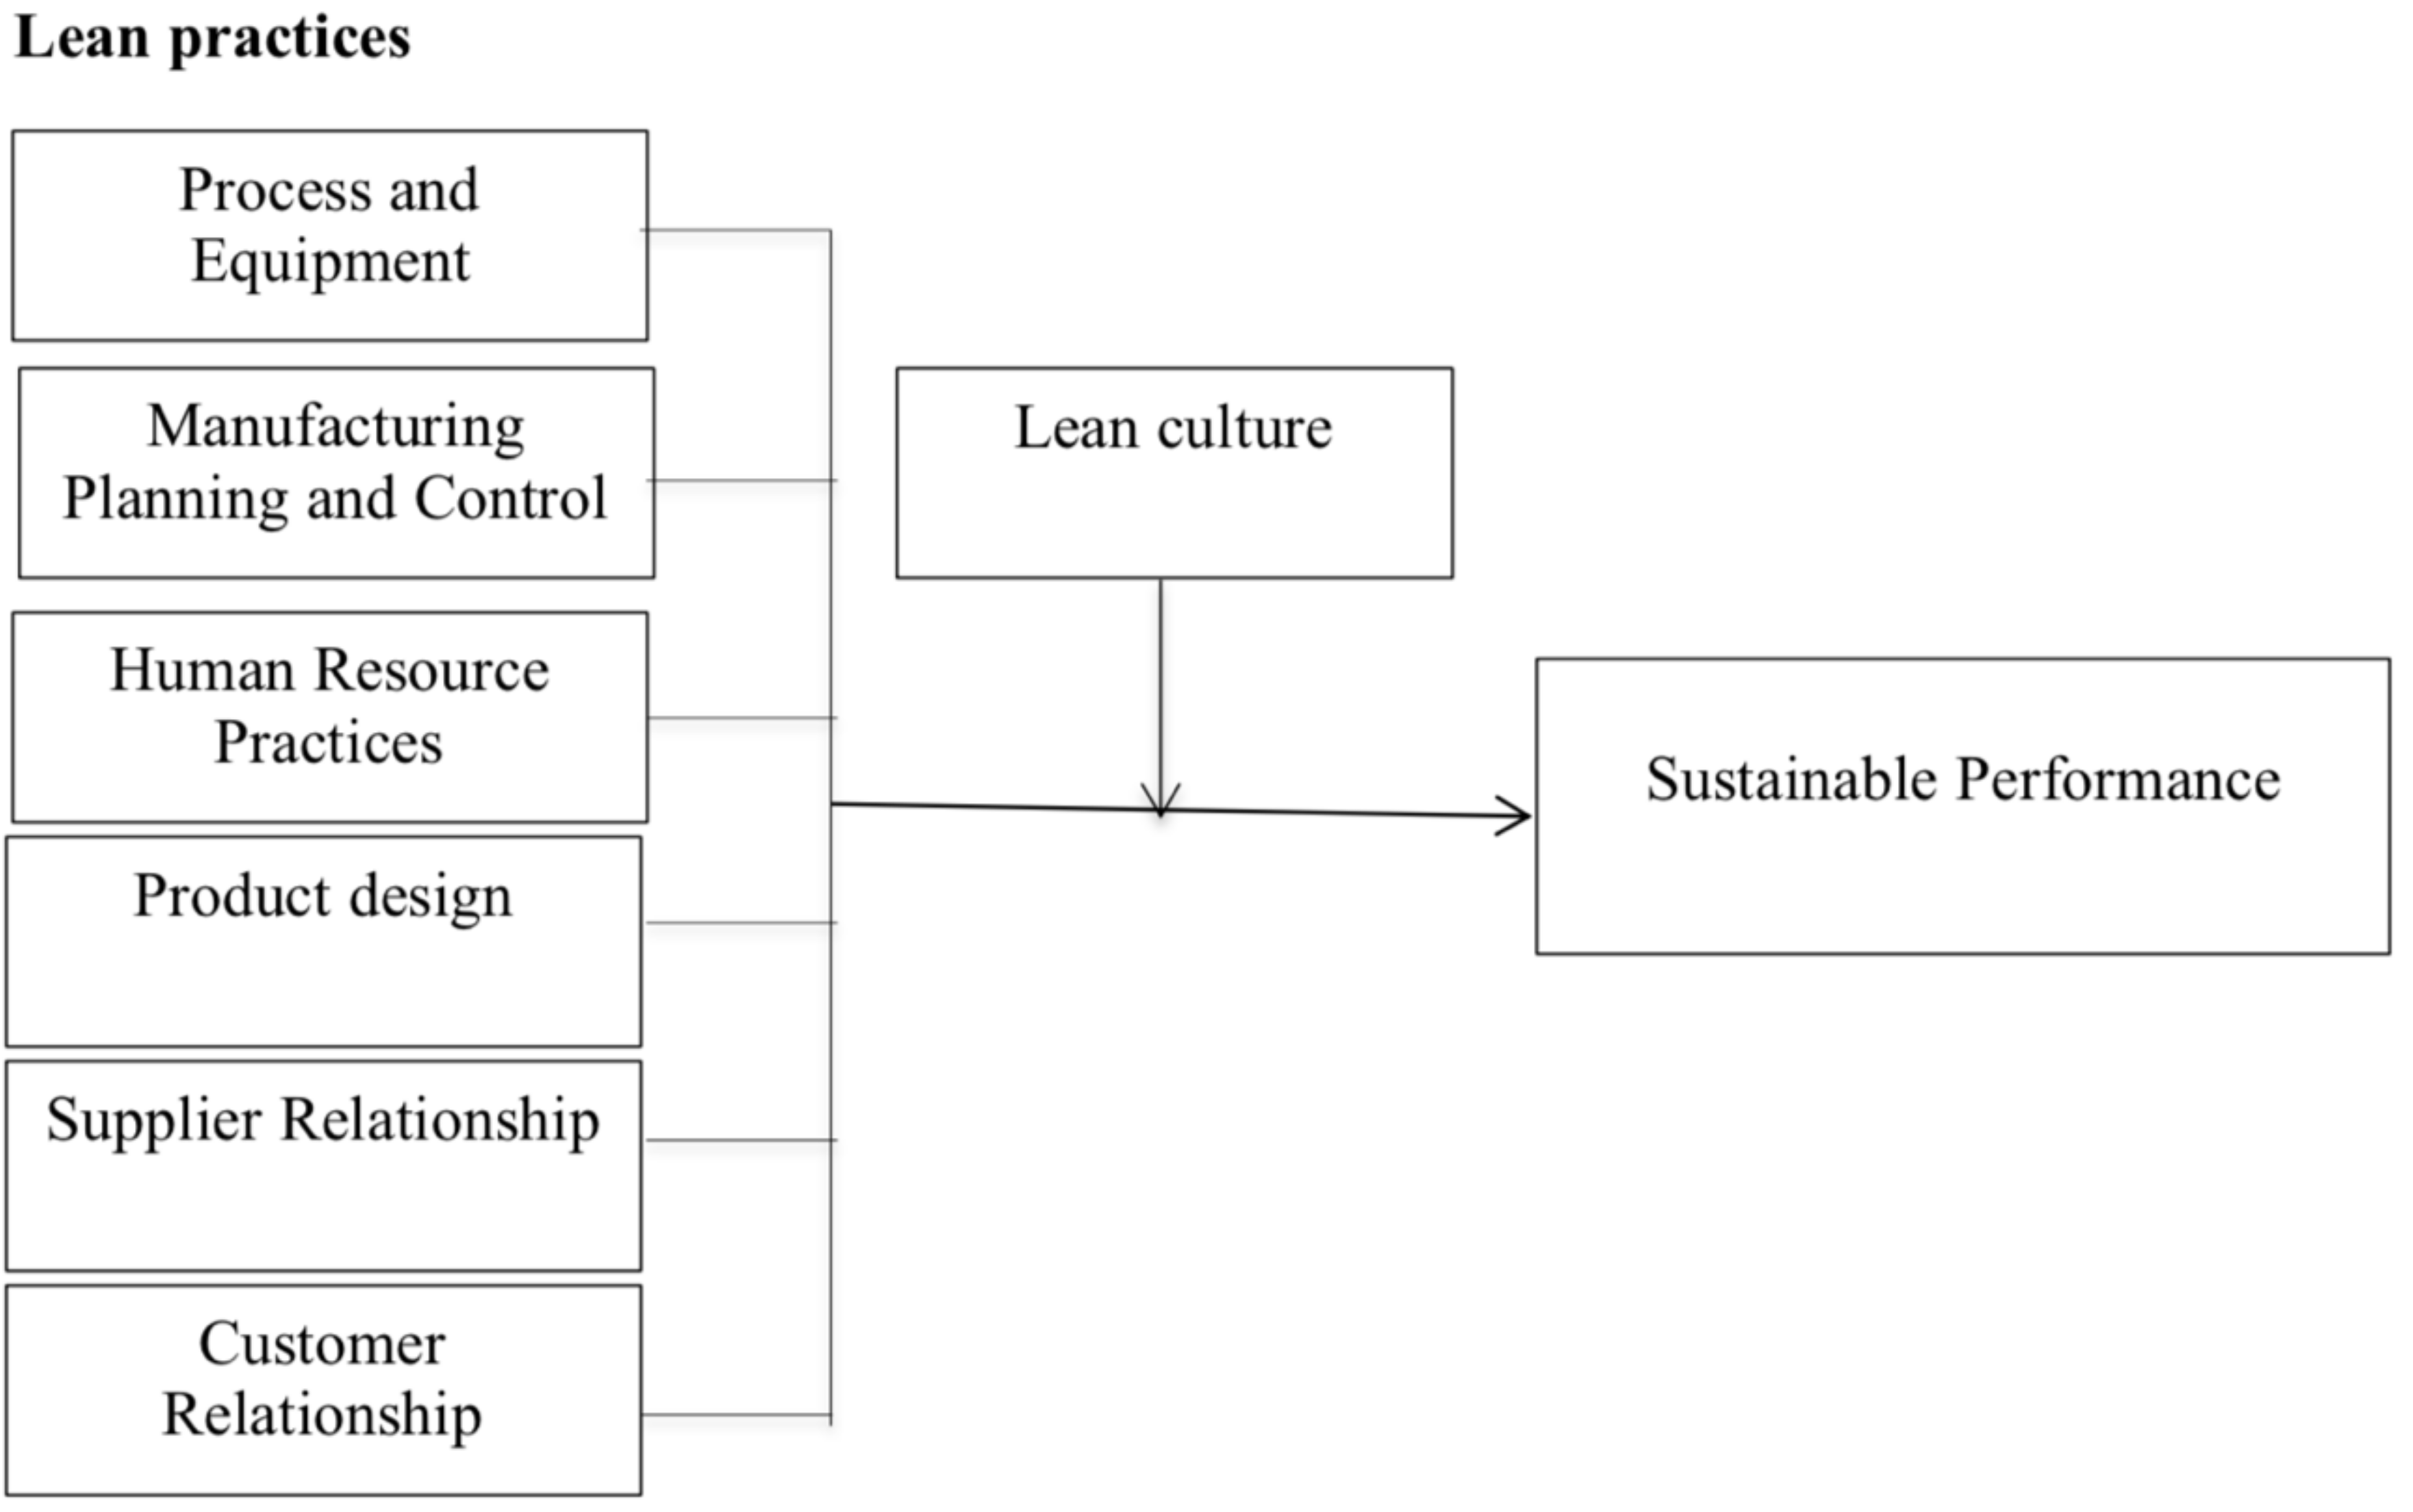 Sustainability | Free Full-Text | Impact of Lean Manufacturing Practices on  Firms' Sustainable Performance: Lean Culture as a Moderator | HTML